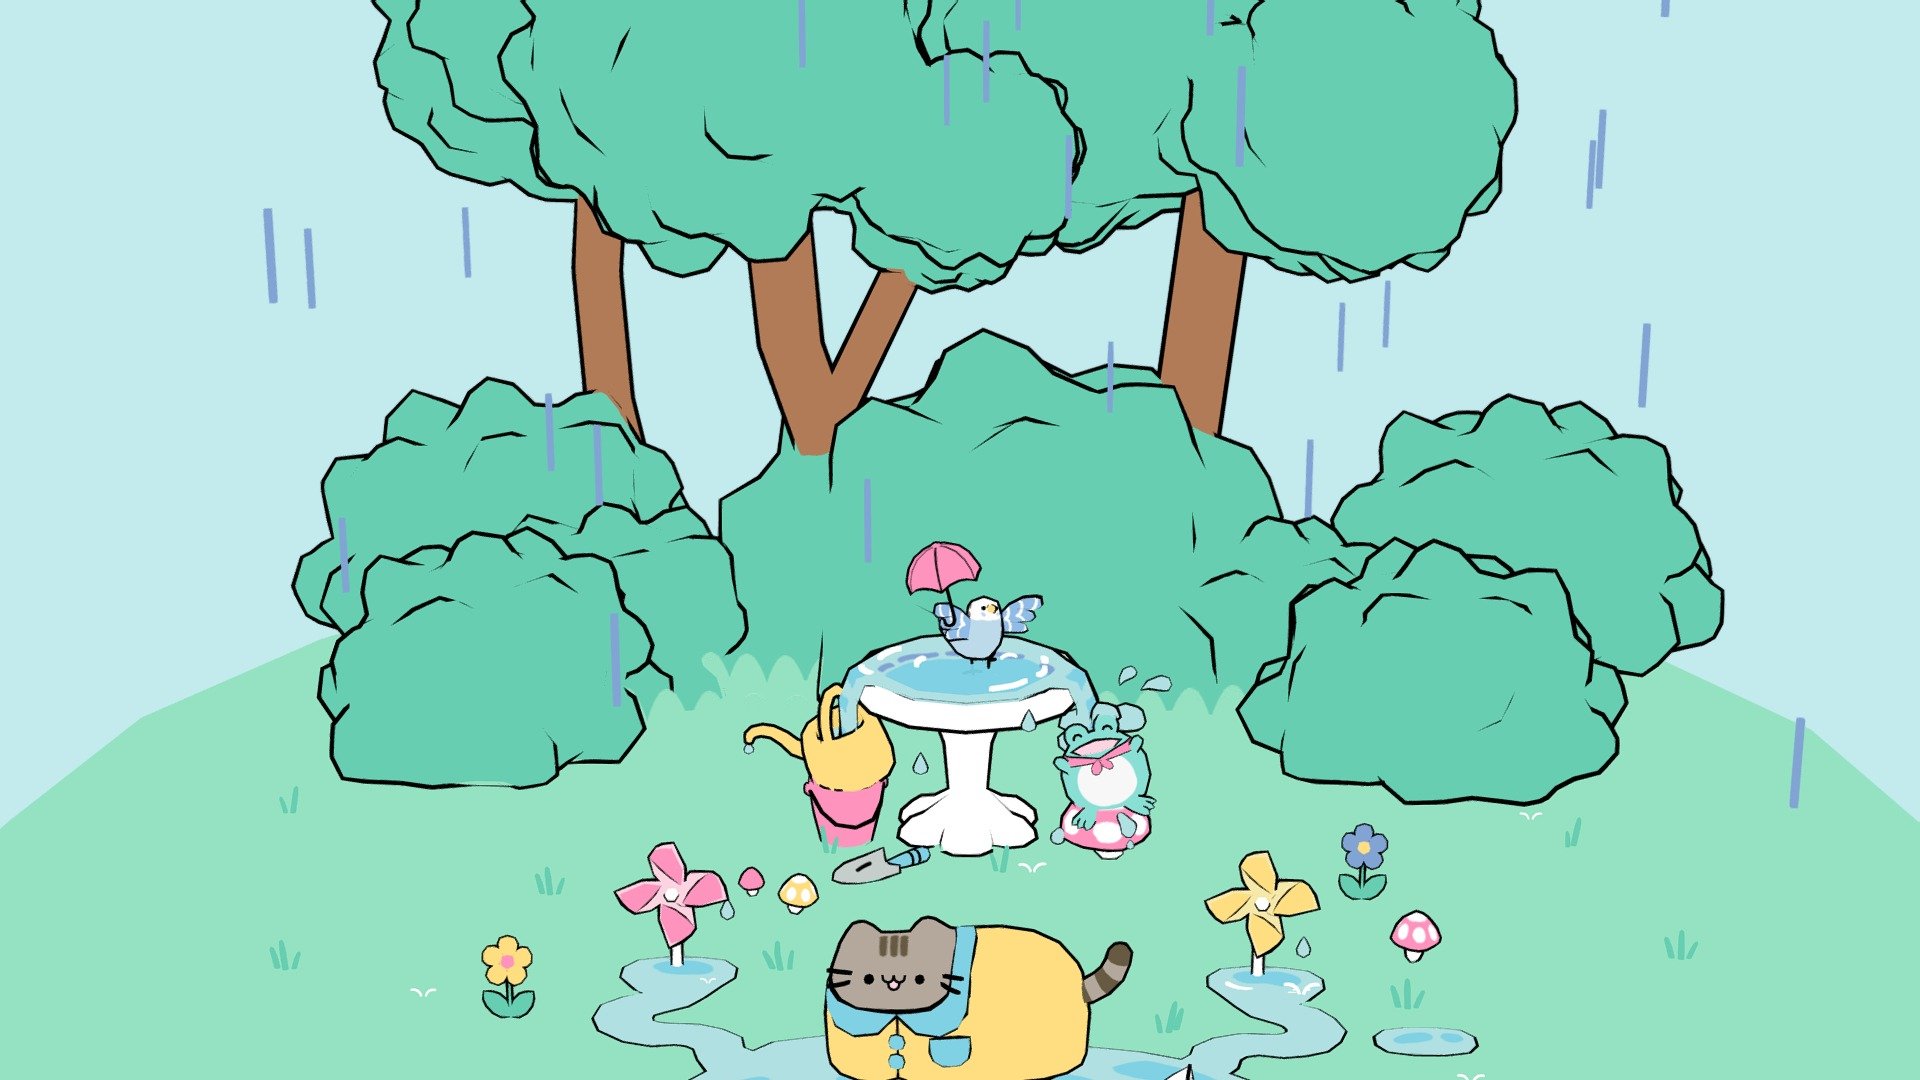 I tried to recreate this very cute Pusheen Spring scene GIF in 3D! 

Modeled and Unwrapped in Maya and textured in Photoshop.


☔😺🌼🐦🍄🐸💦 pic.twitter.com/O36Hj8ShQ5
&mdash; Pusheen the cat (@Pusheen) March 2, 2019 - Pusheen Spring Scene - 3D model by PallaviMaruvada 3d model